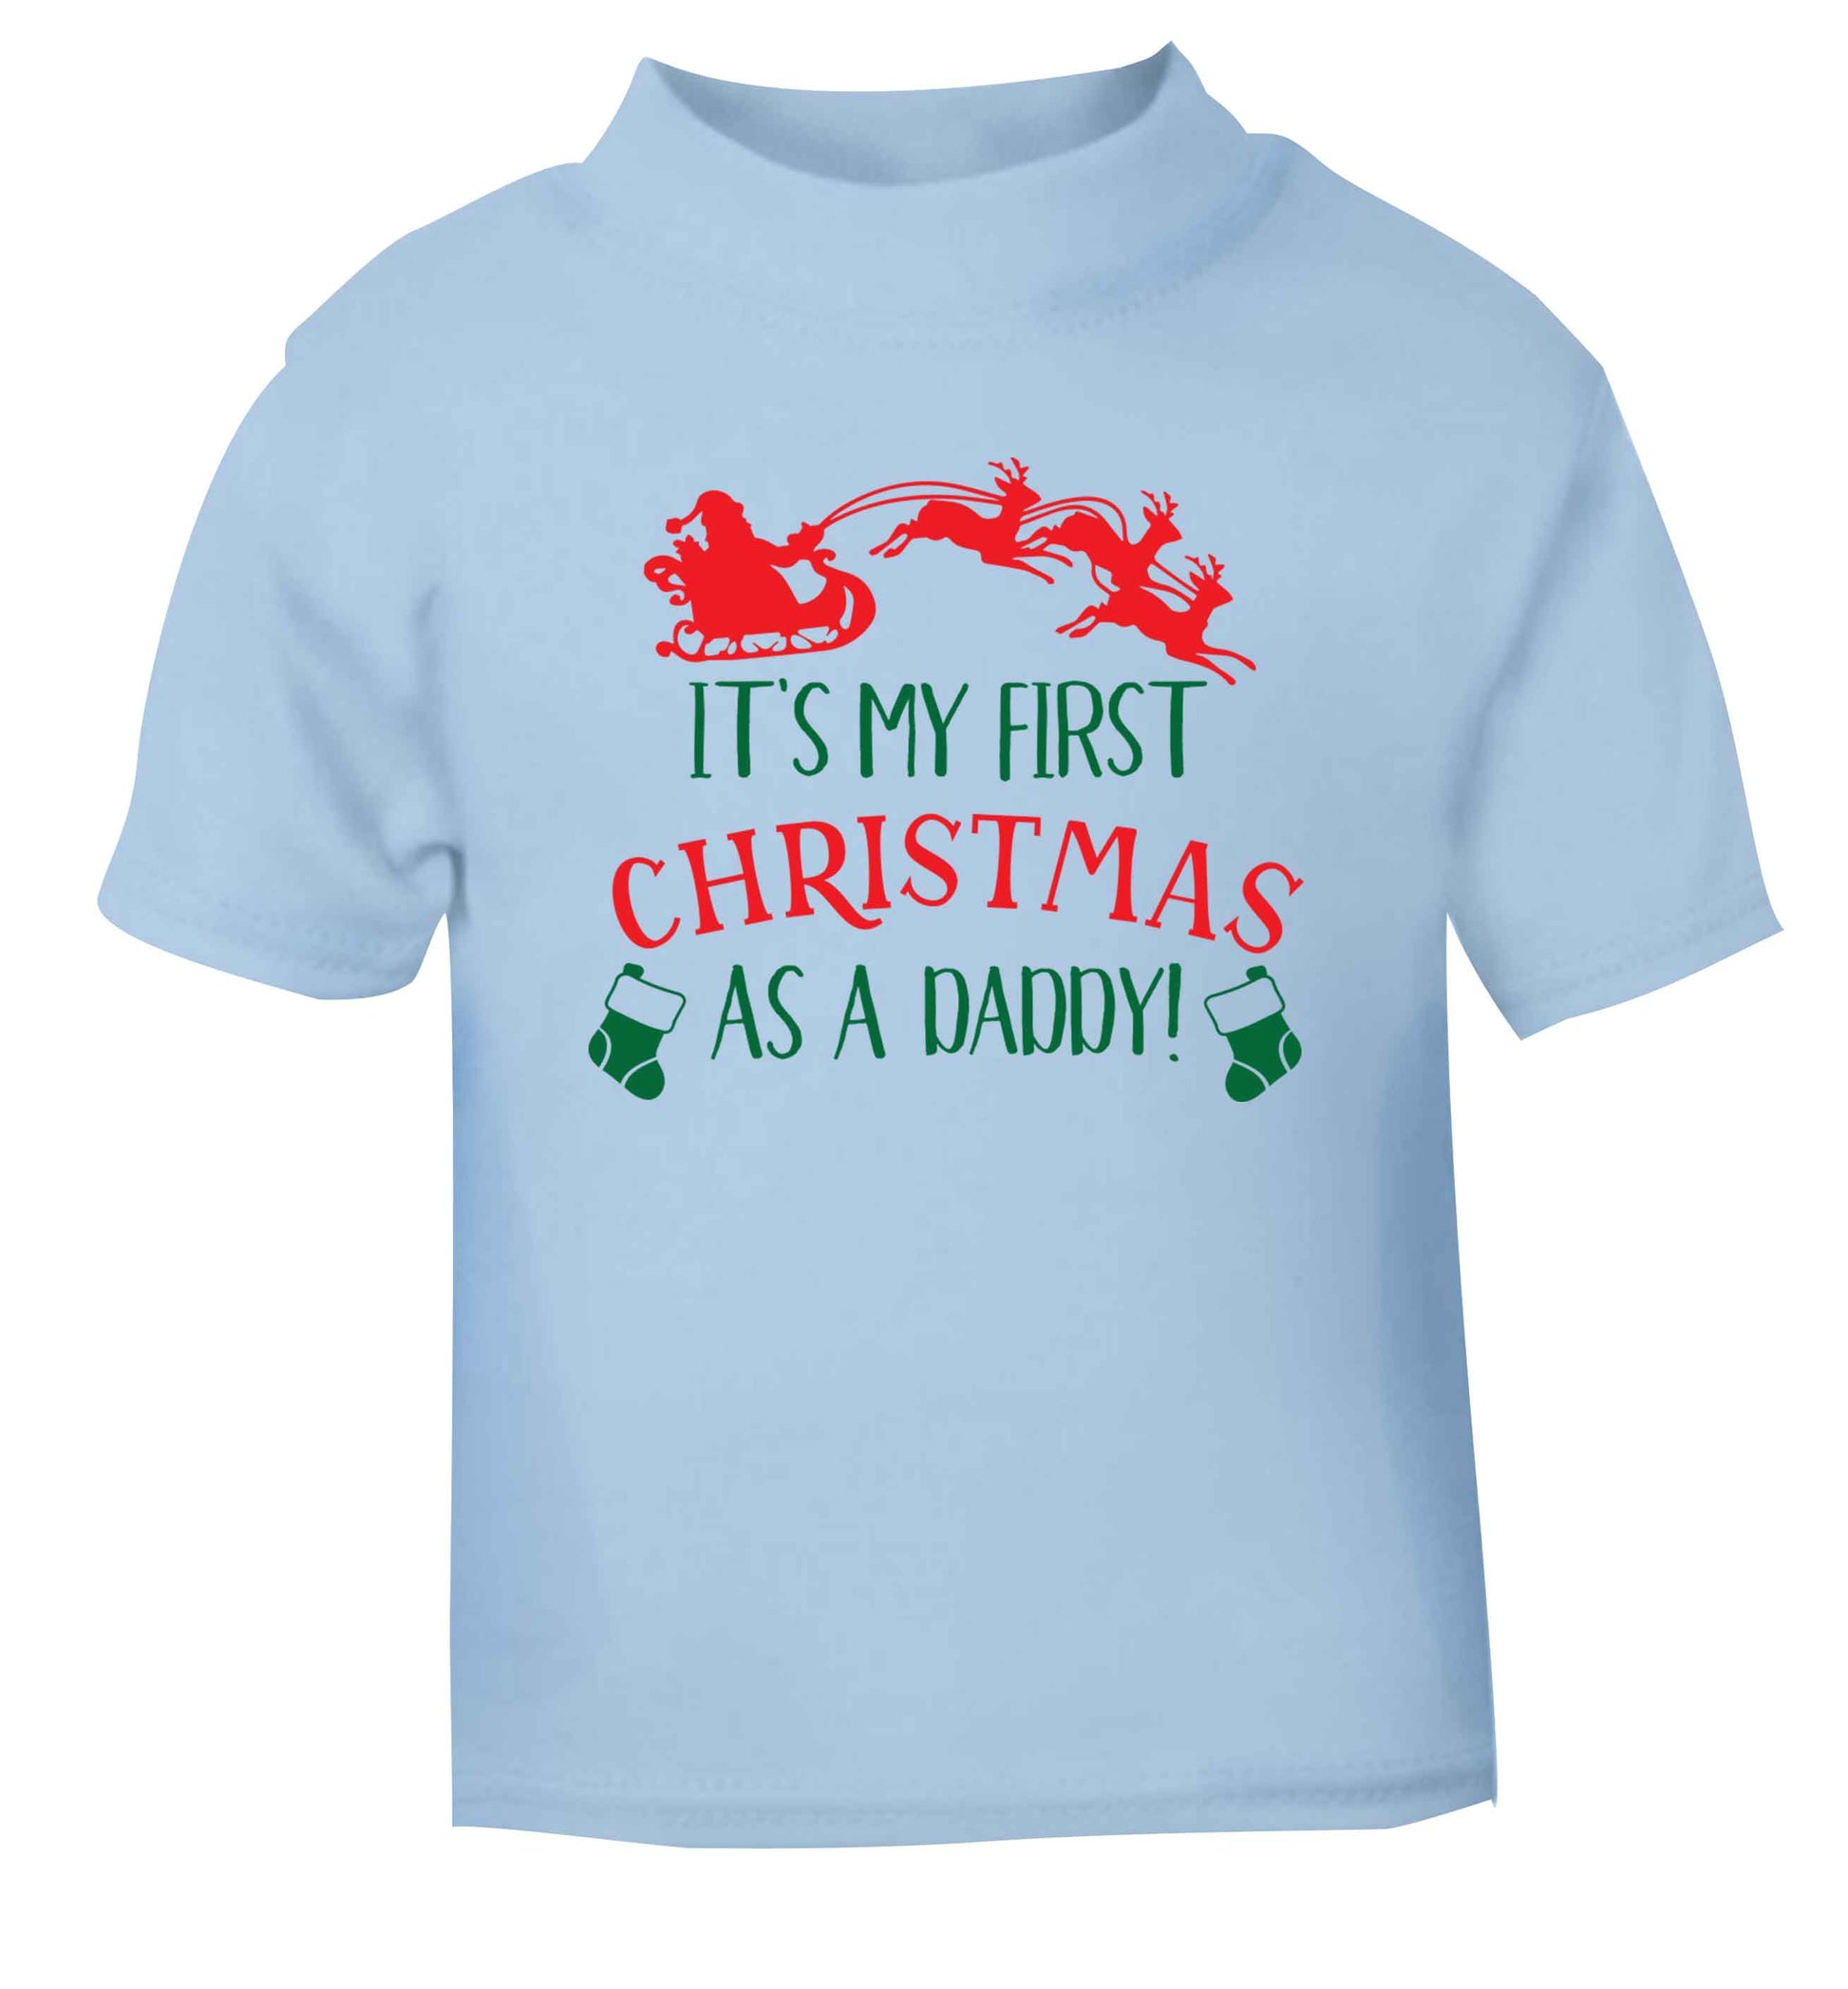 It's my first Christmas as a daddy light blue Baby Toddler Tshirt 2 Years